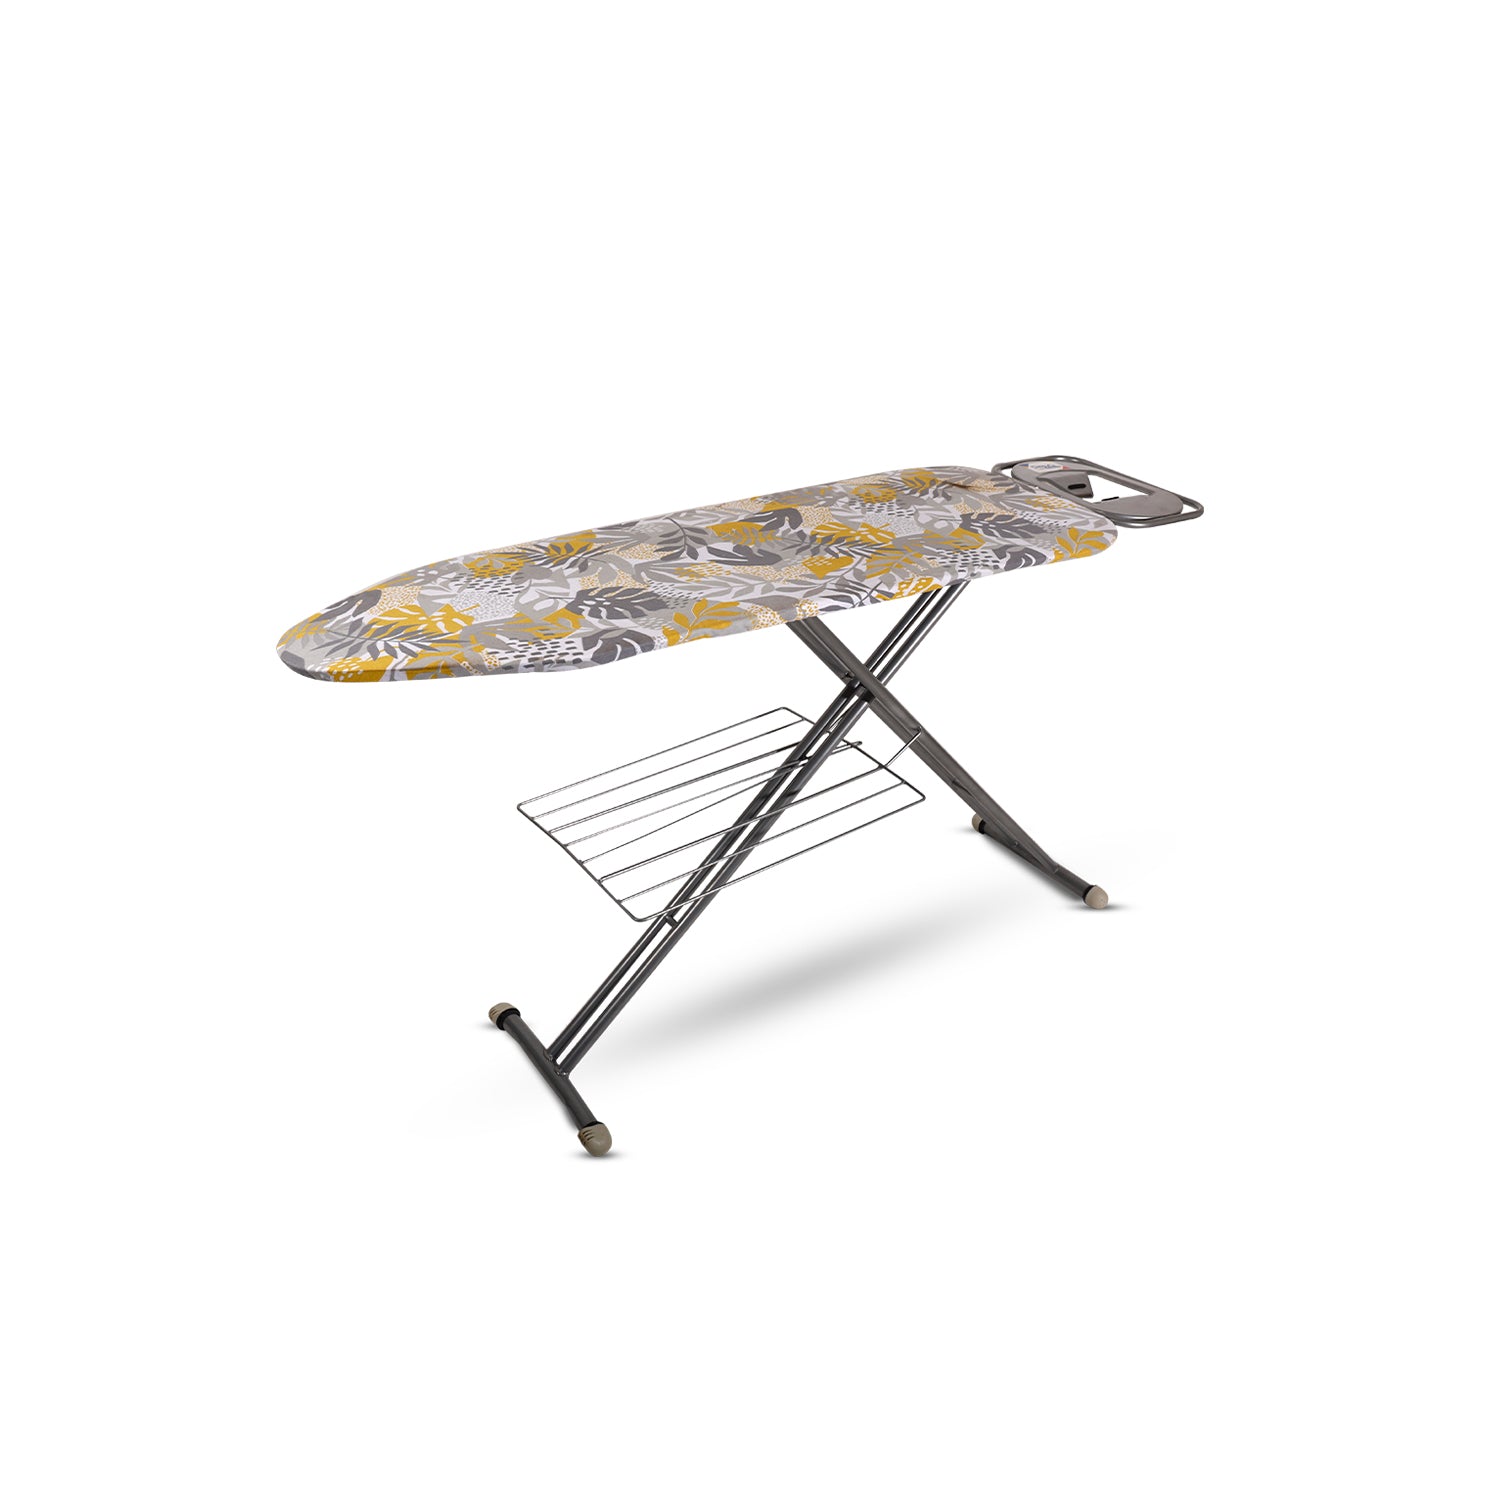 Ironing Boards - San Jose Recycles